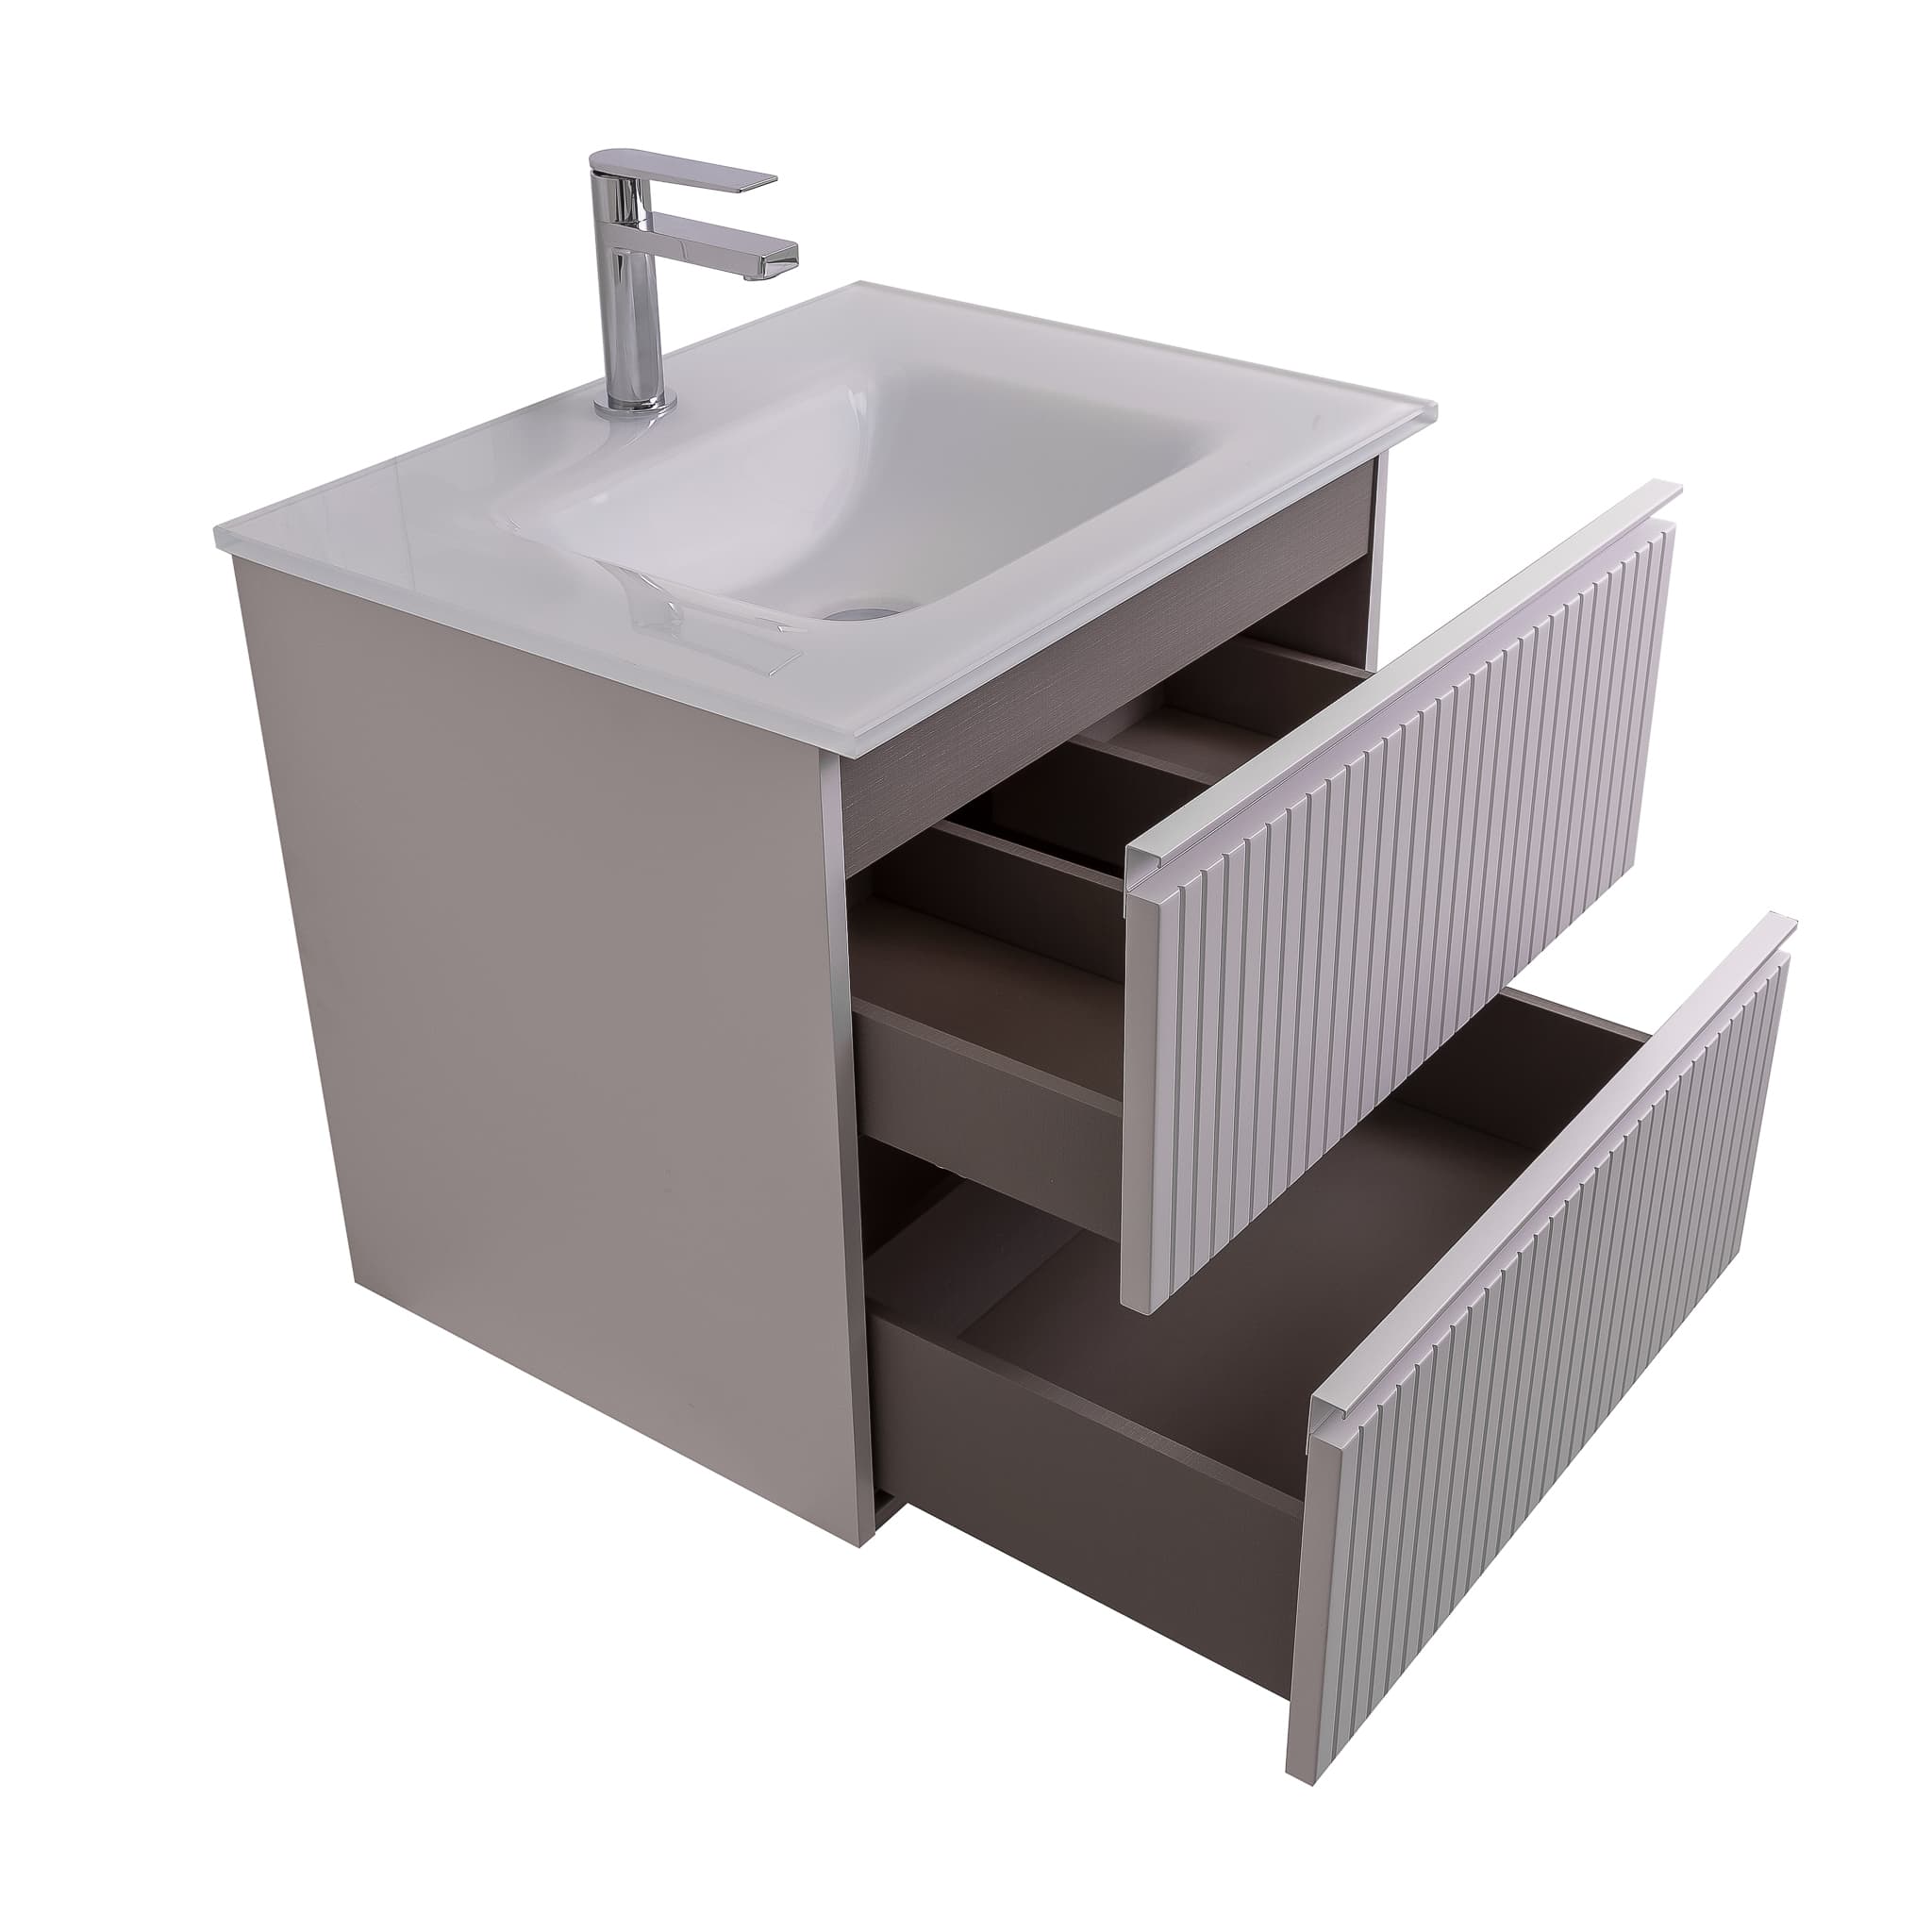 Ares 23.5 Matte White Cabinet, White Tempered Glass Sink, Wall Mounted Modern Vanity Set